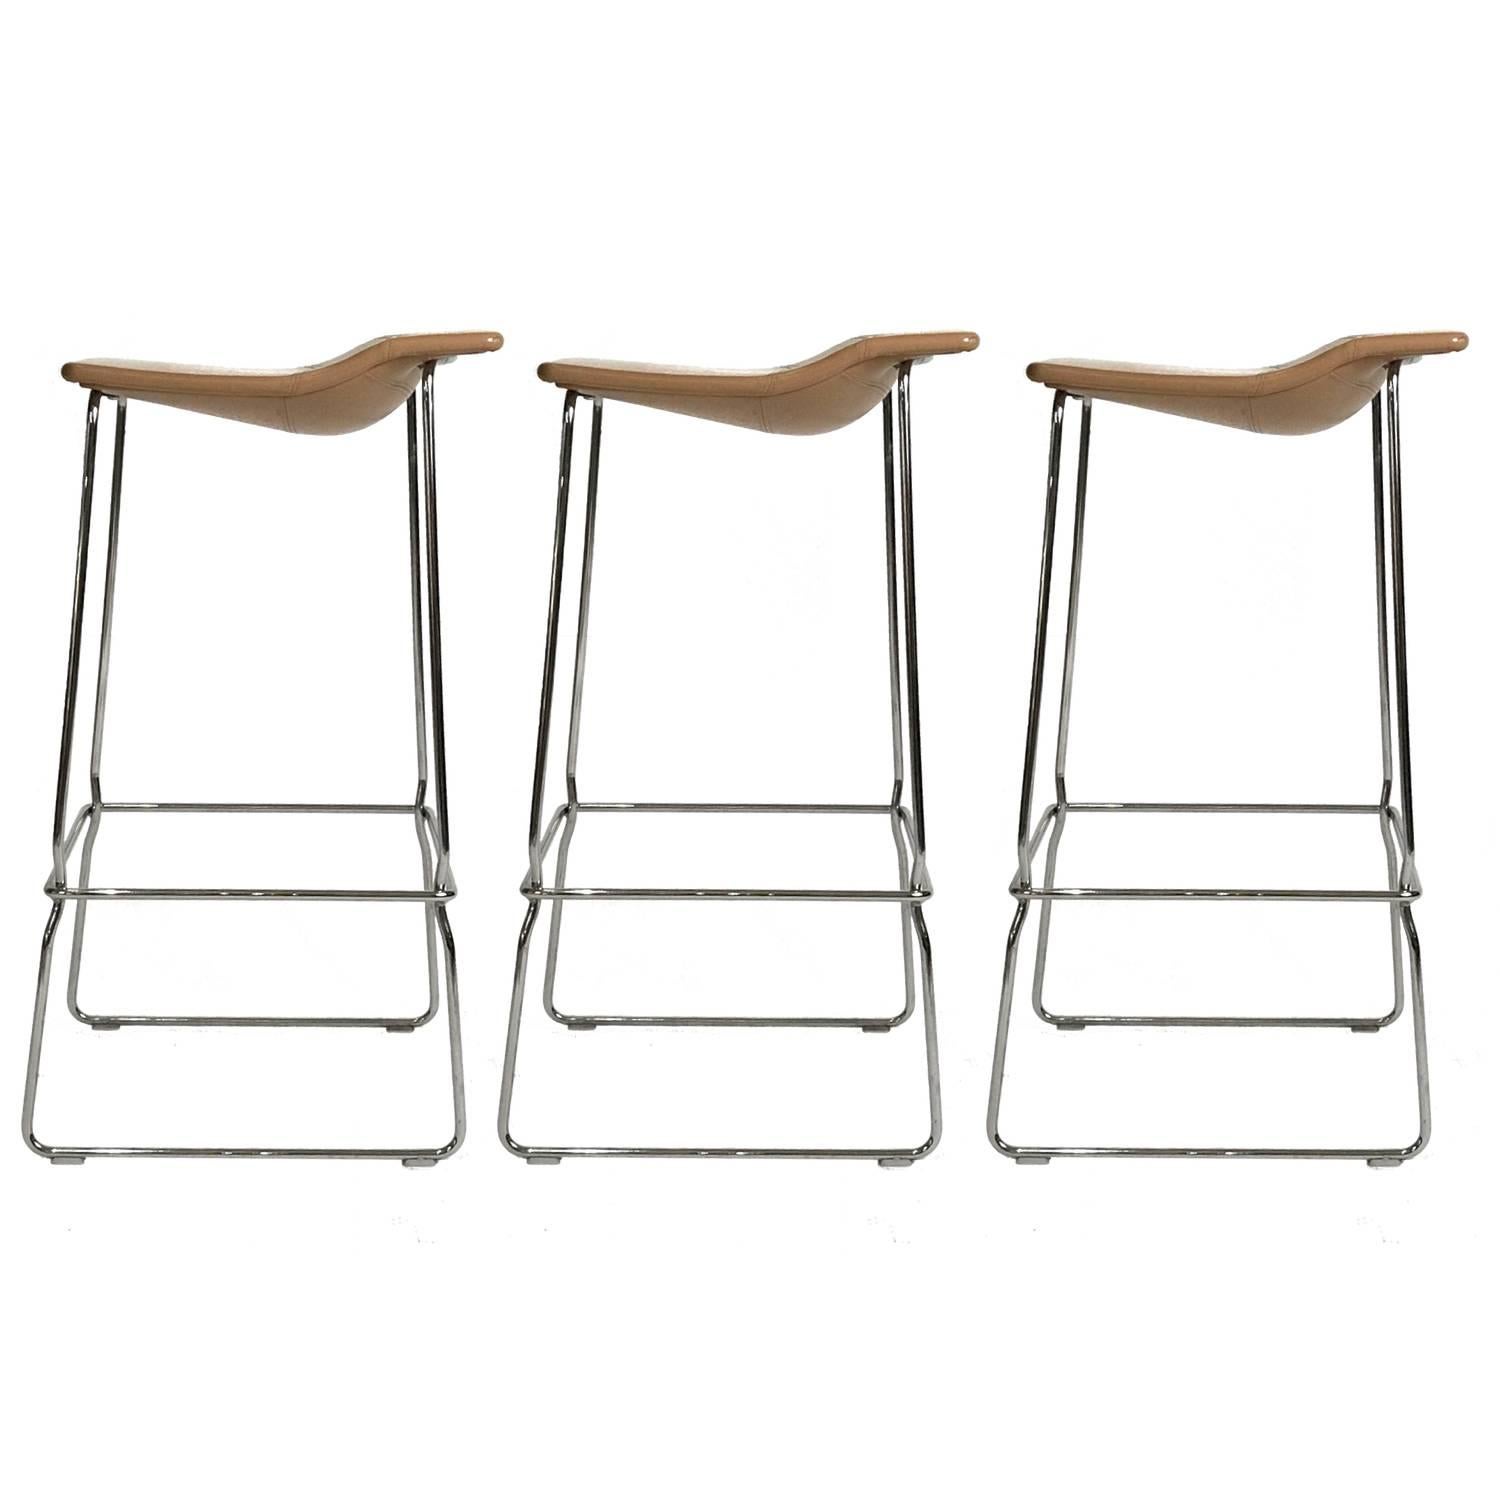 Clean and elegant stool made of flexing steel to offer surprising comfort. Shaped seats in leather with saddle stitch detail. Measures: High stool 31.5” H, 17.25” W, 17” D.